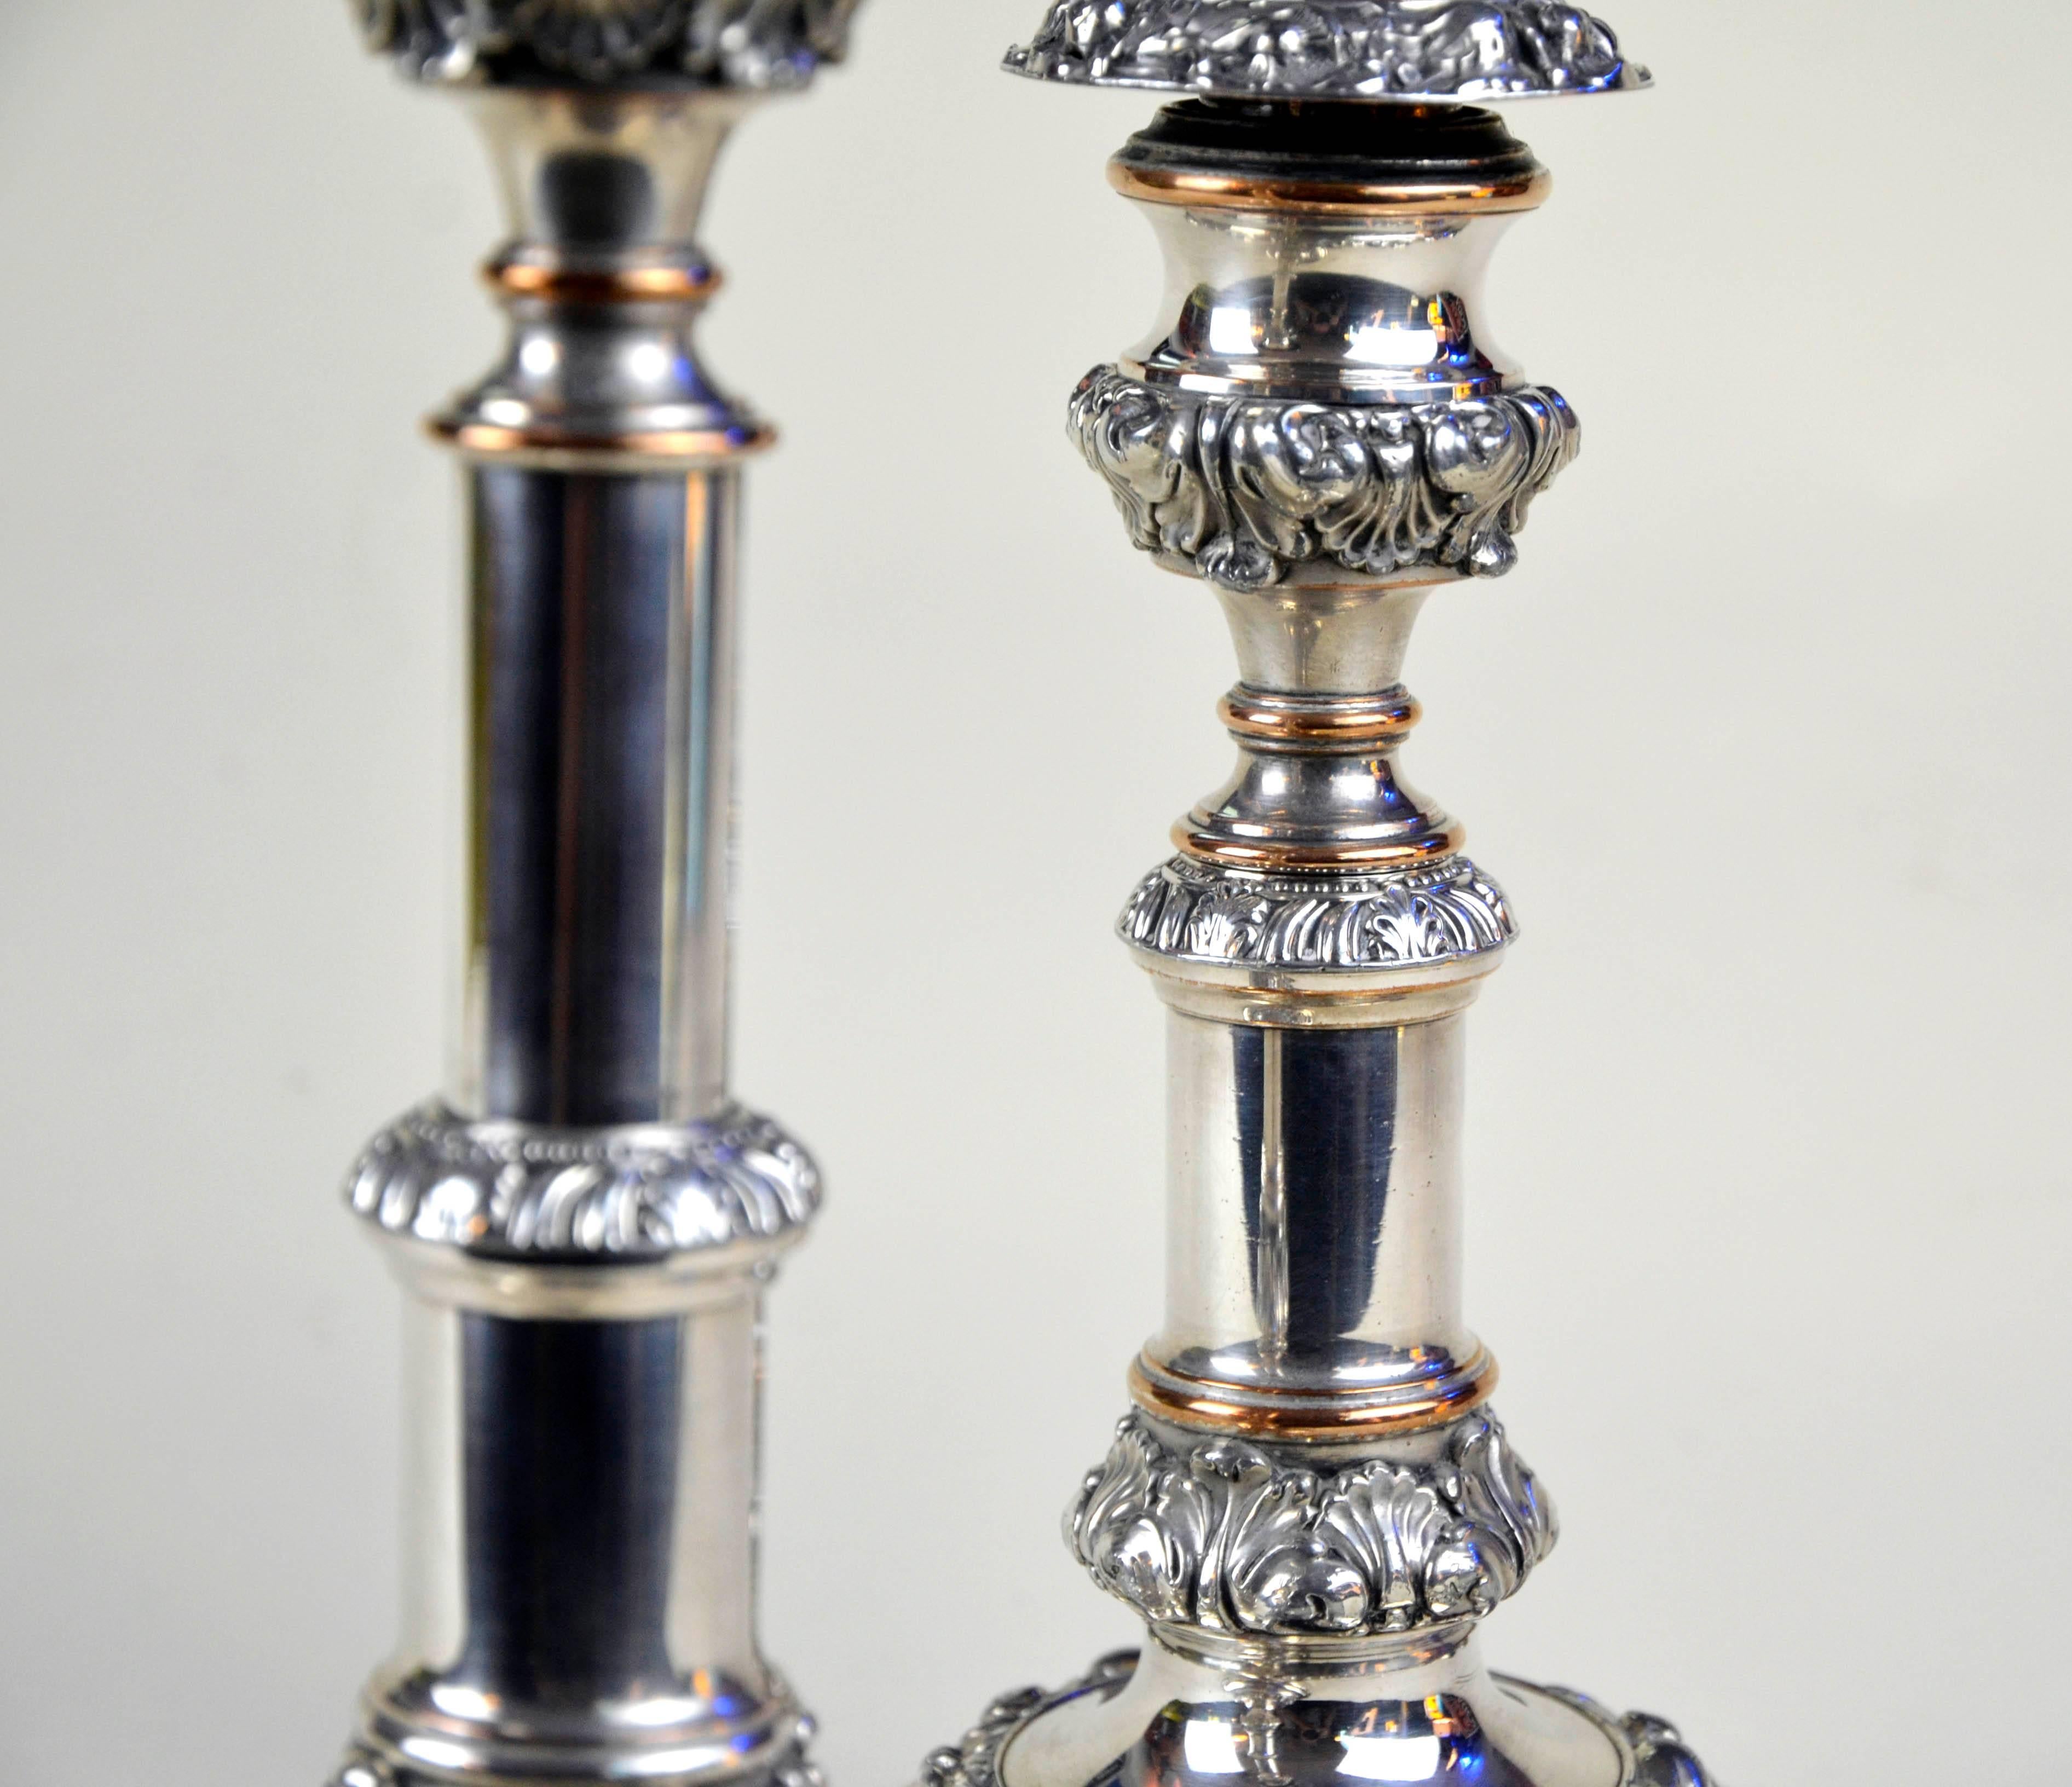 1820s Pair of English Georgian Old Sheffield Plate Telescopic Candlesticks For Sale 4